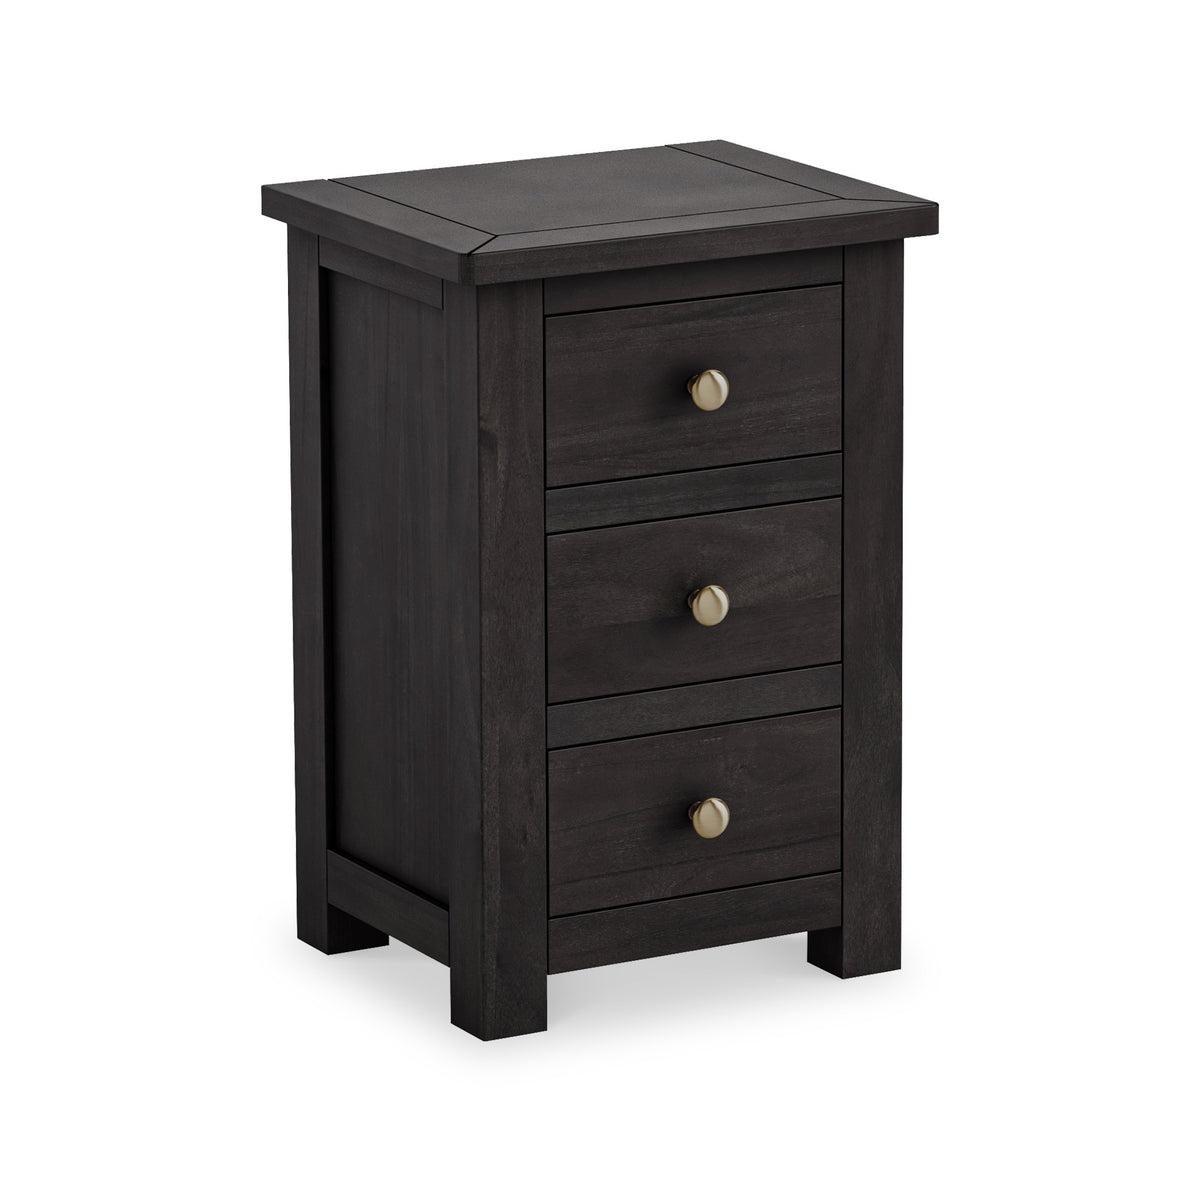 Duchy Acacia 3 Drawer Black Bedside Table from Roseland Furniture